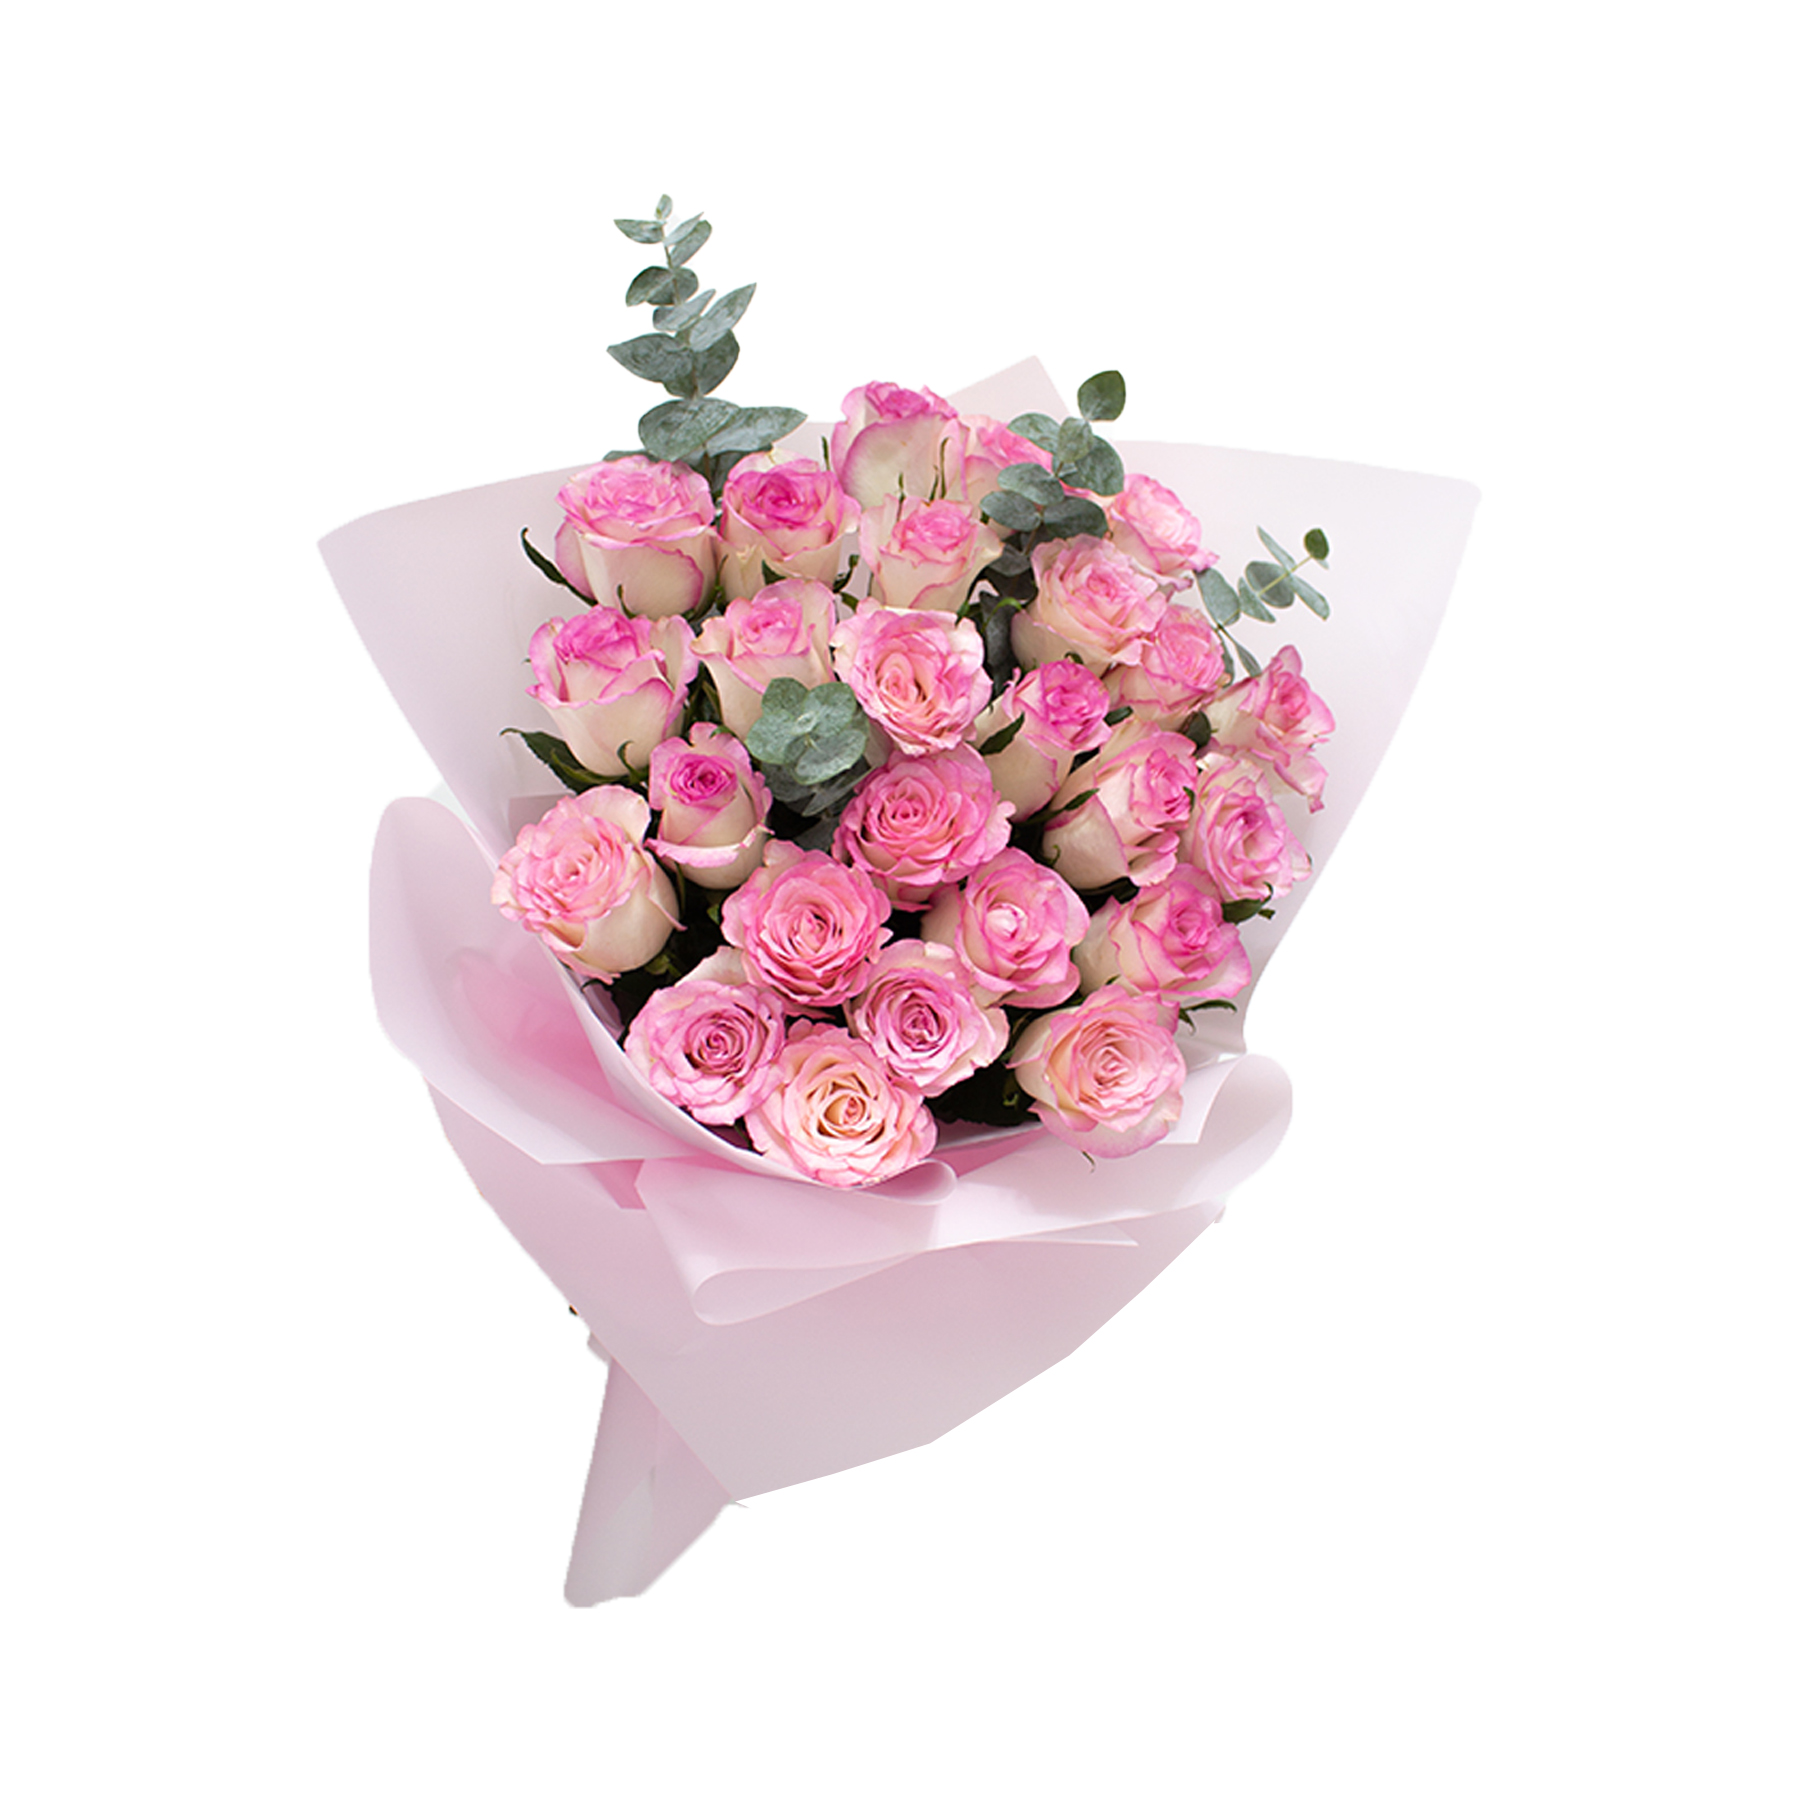 roses-of-mix-color-pink-and-white3